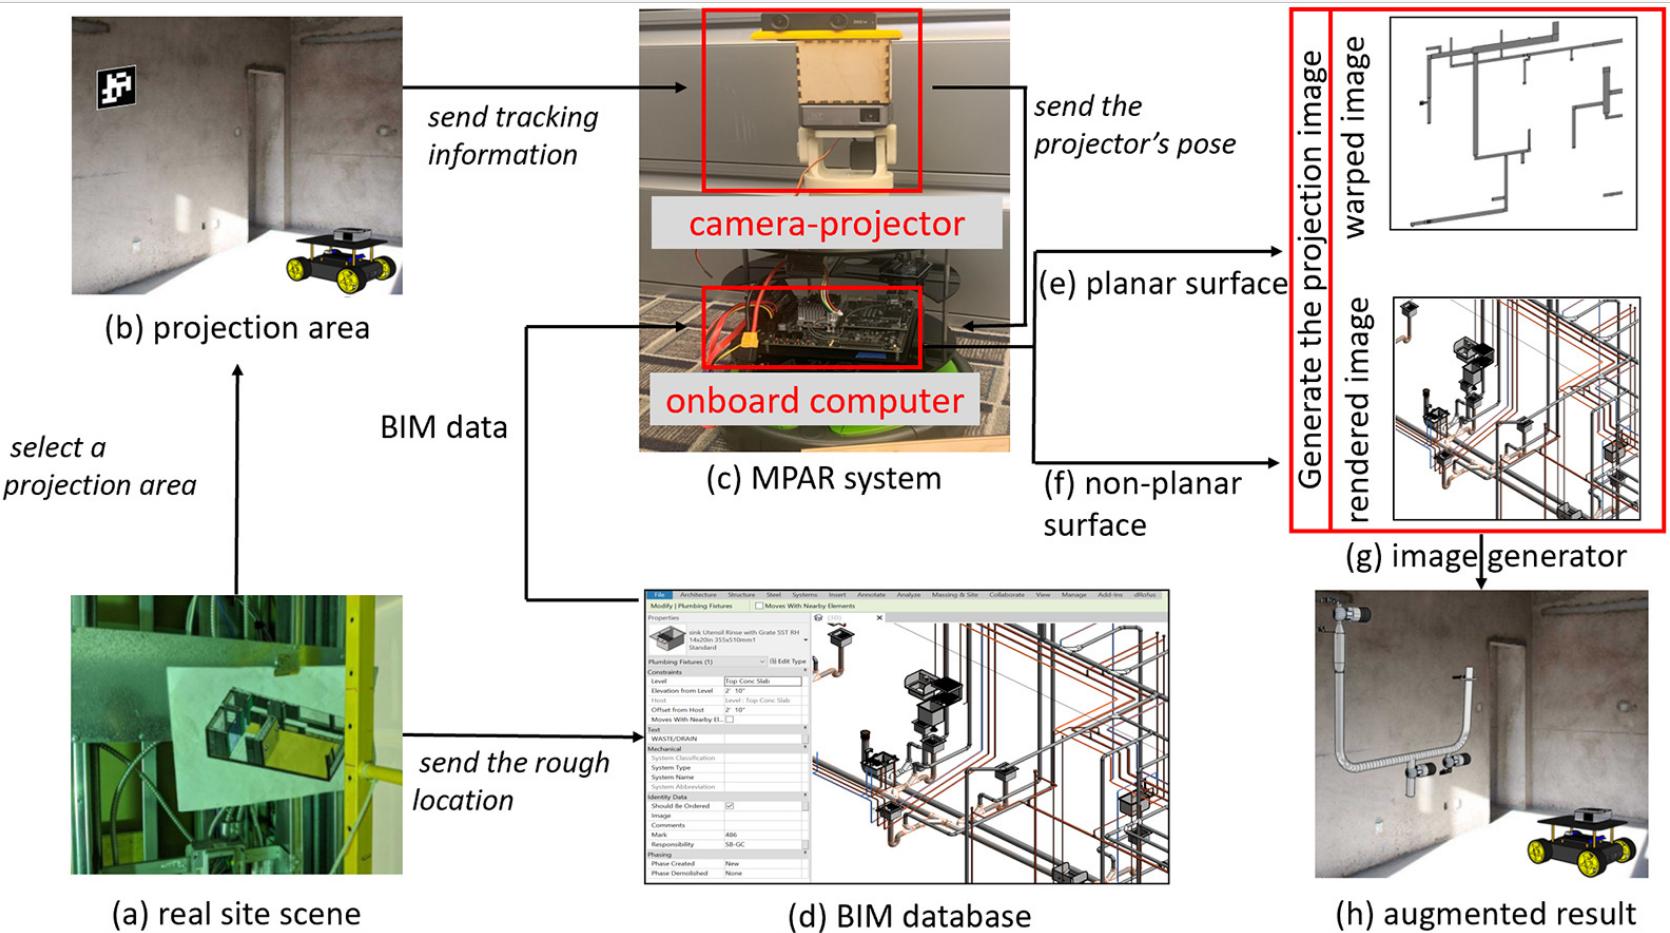 Mobile projective augmented reality for collaborative robots in construction